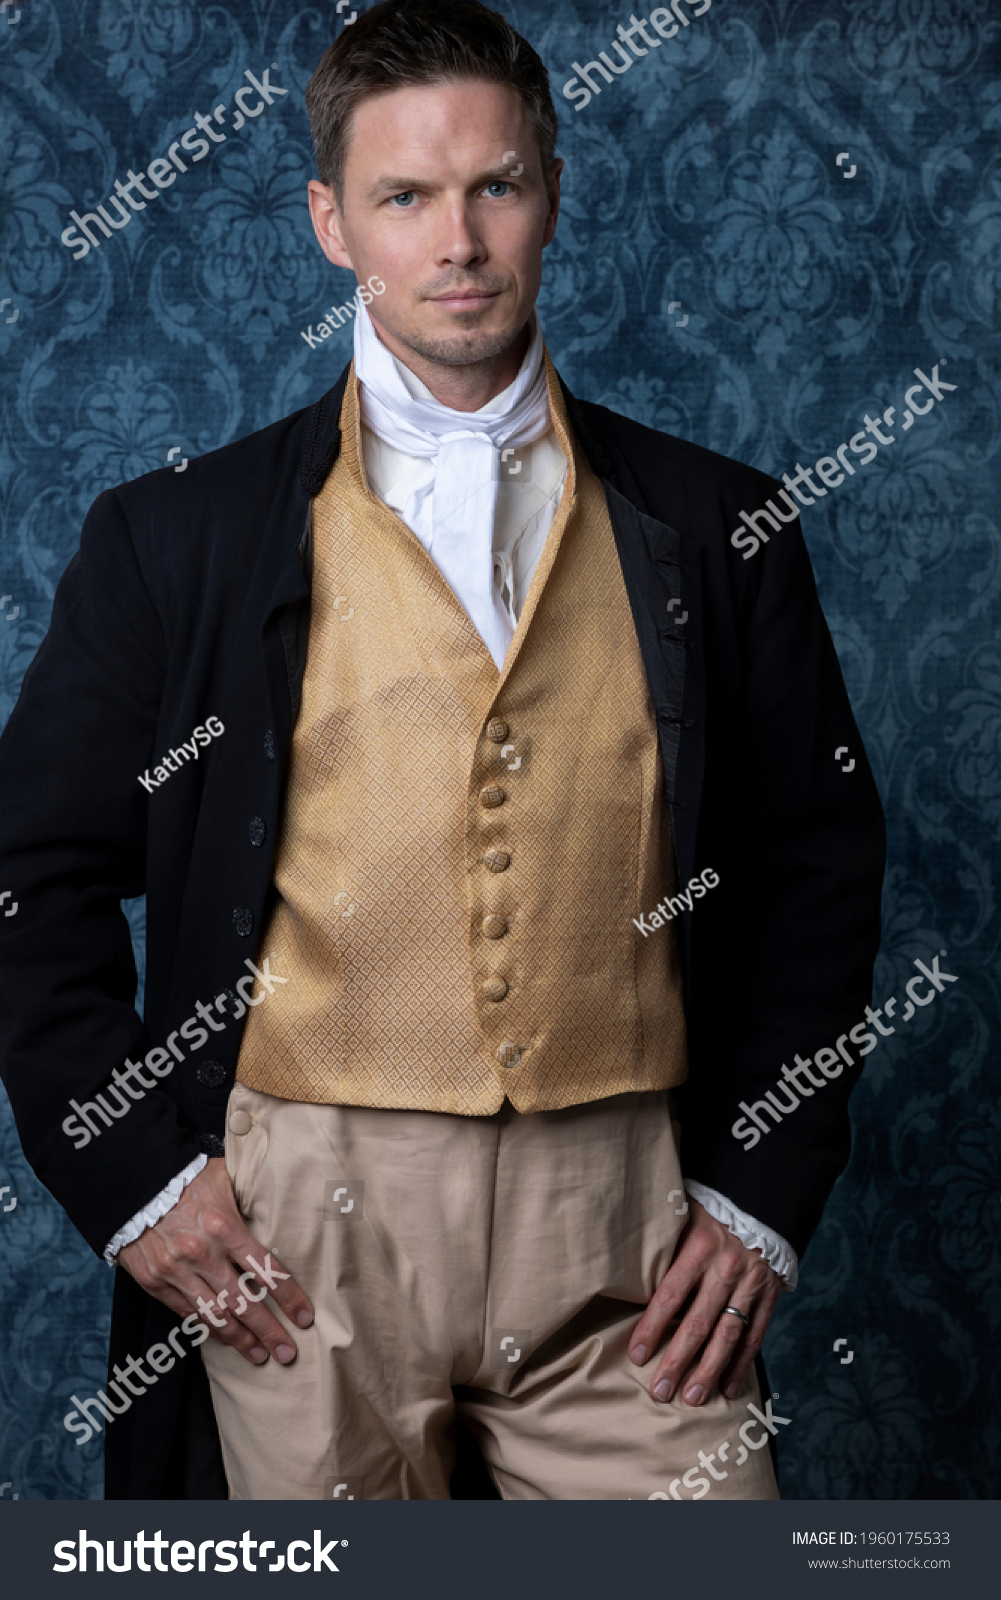 A handsome Regency gentleman wearing a gold waistcoat and black jacket and standing in a room with blue wallpaper and a wooden floor #1960175533